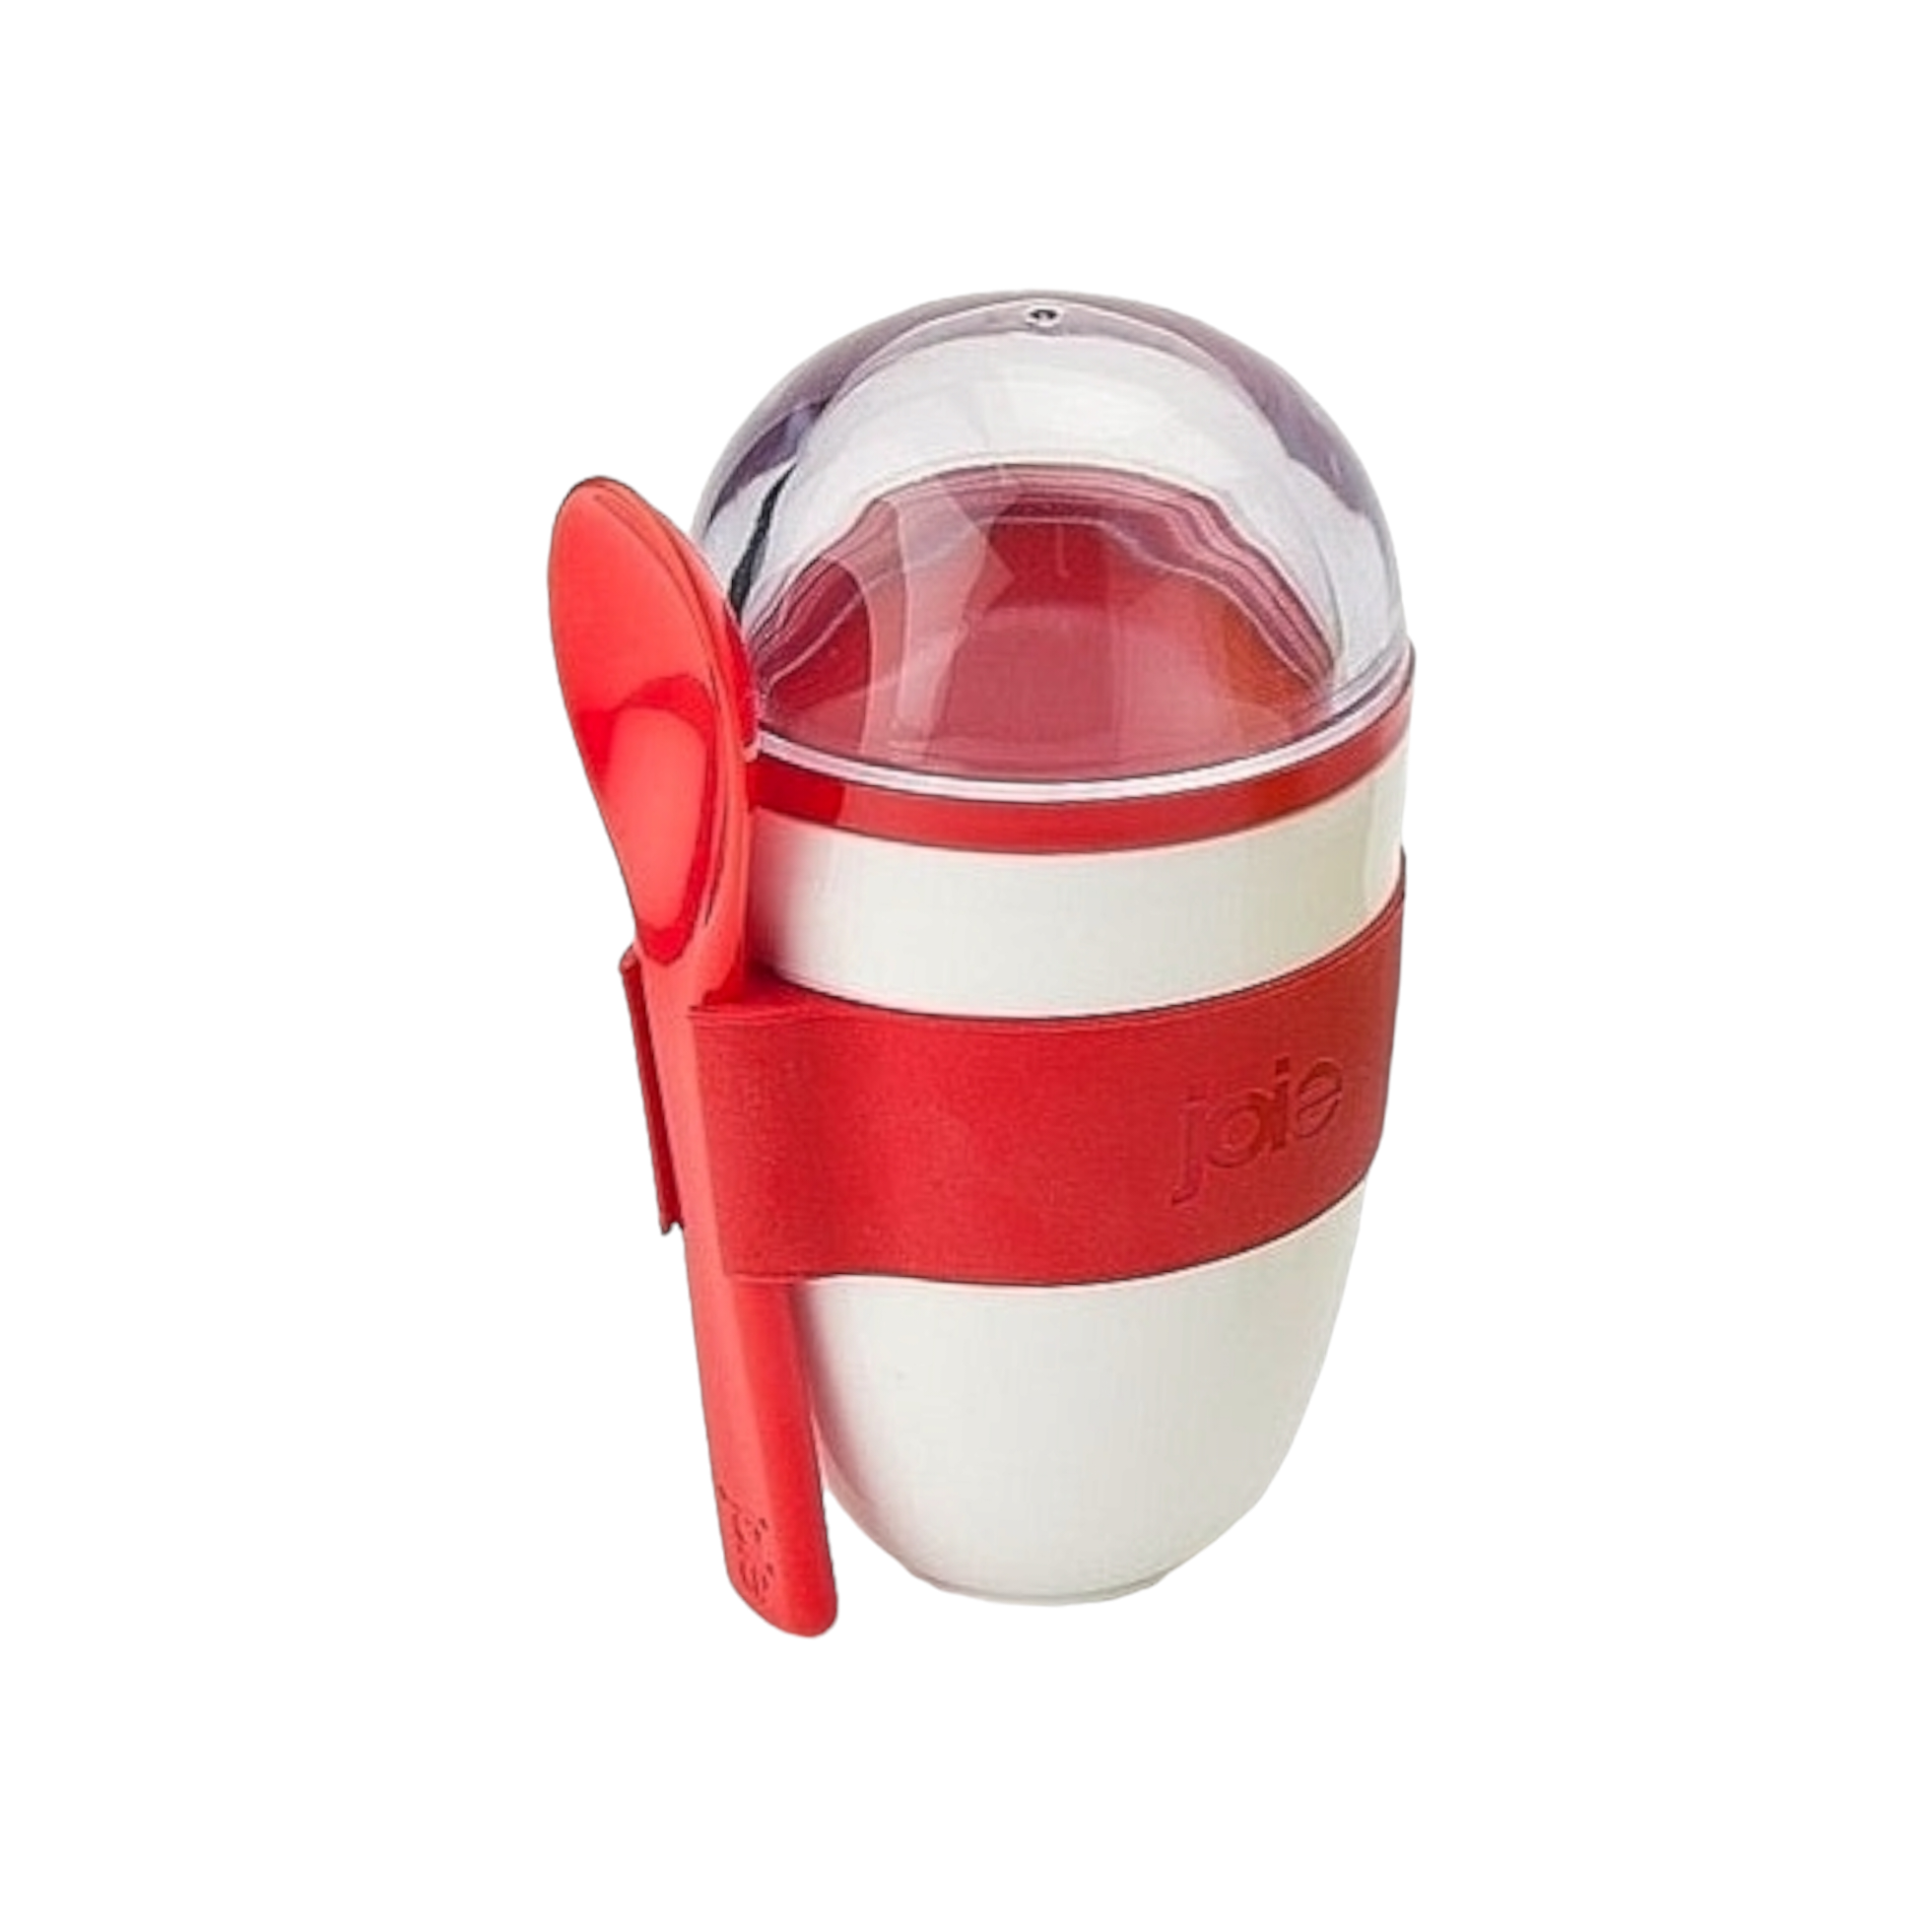 Joie Take 'N Go Yoghurt Cup 320ml Cereal on th Go Container 15330